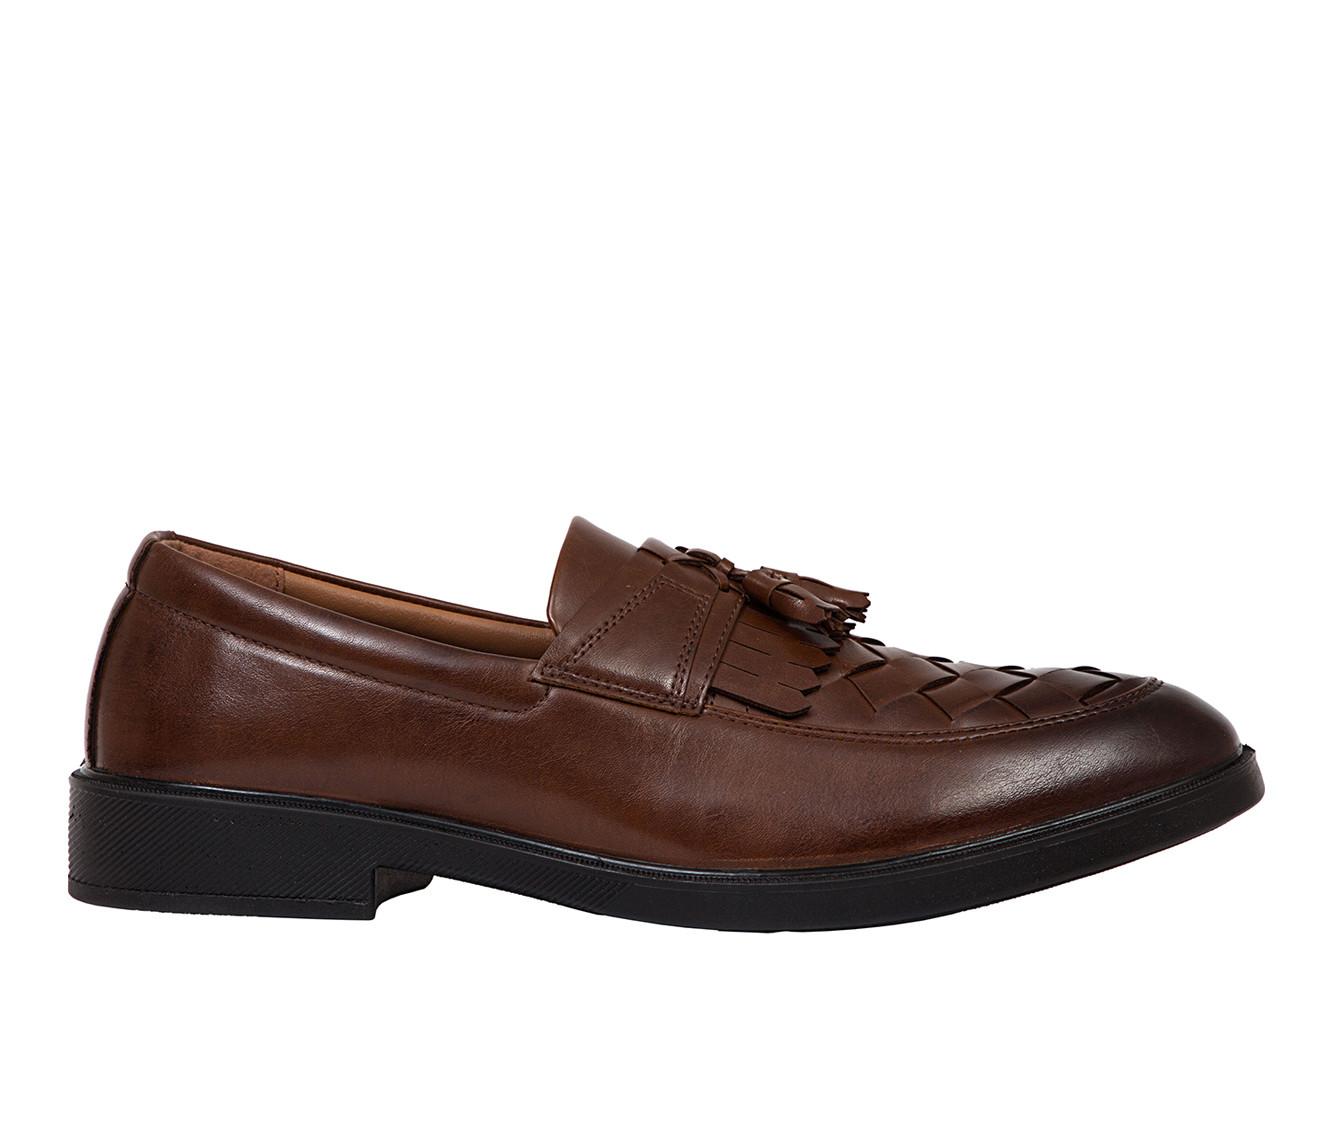 Men's Deer Stags Borough Dress Loafers